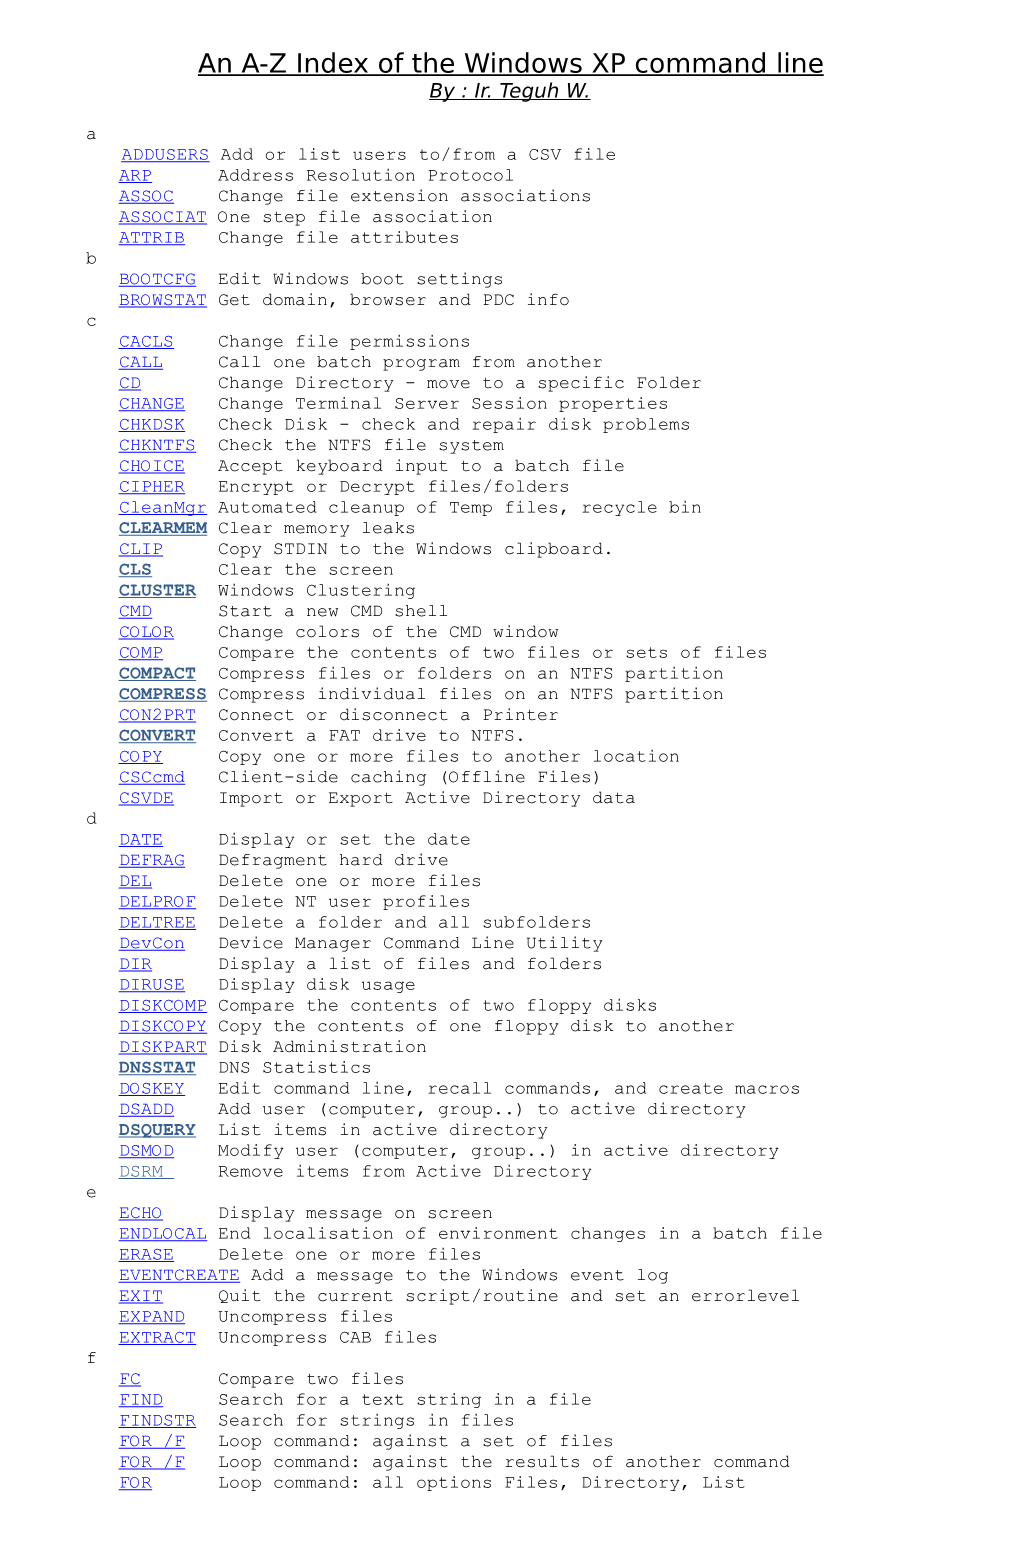 An A-Z Index of the Windows XP Command Line by : Ir